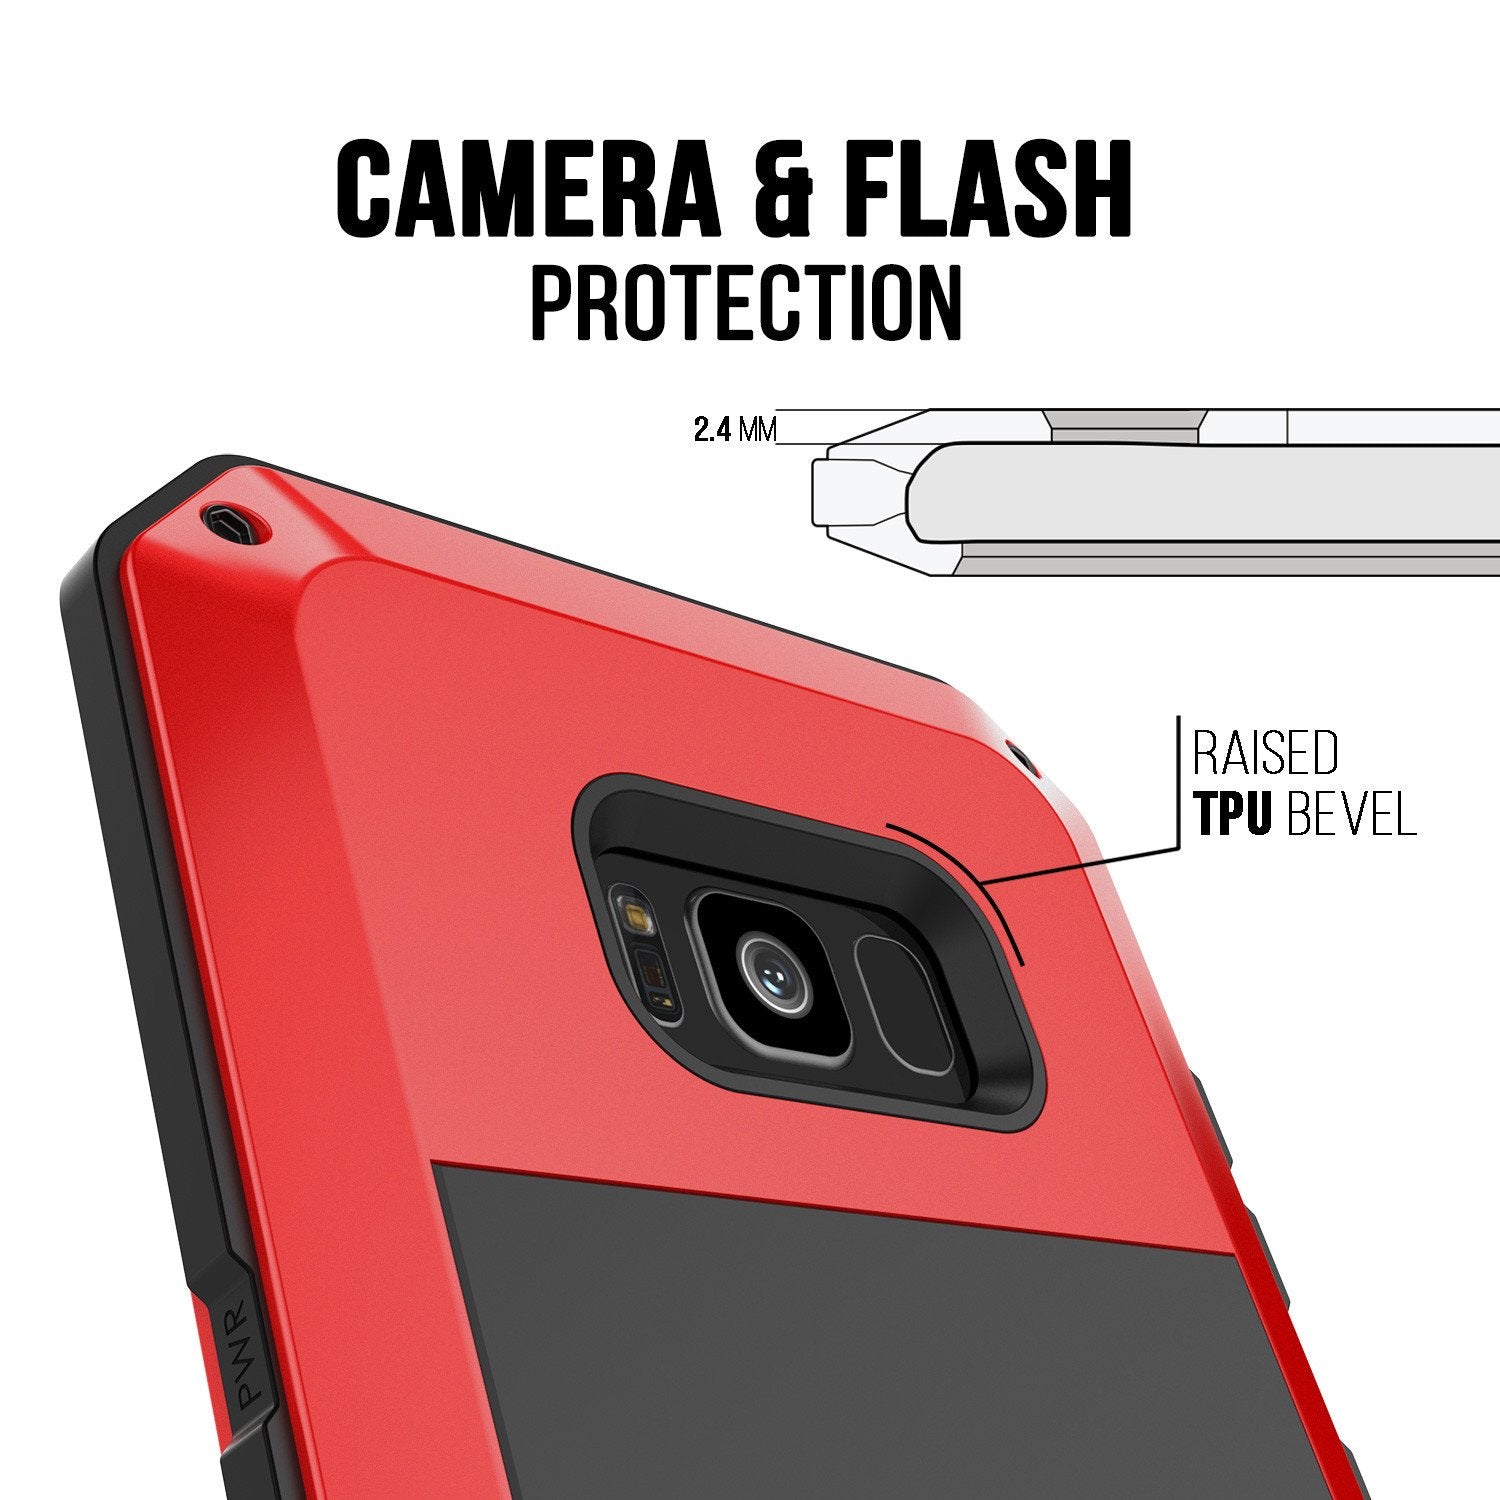 Galaxy S8+ Plus Metal Case, Heavy Duty Military Grade Rugged Armor Cover [shock proof] W/ Prime Drop Protection [RED]